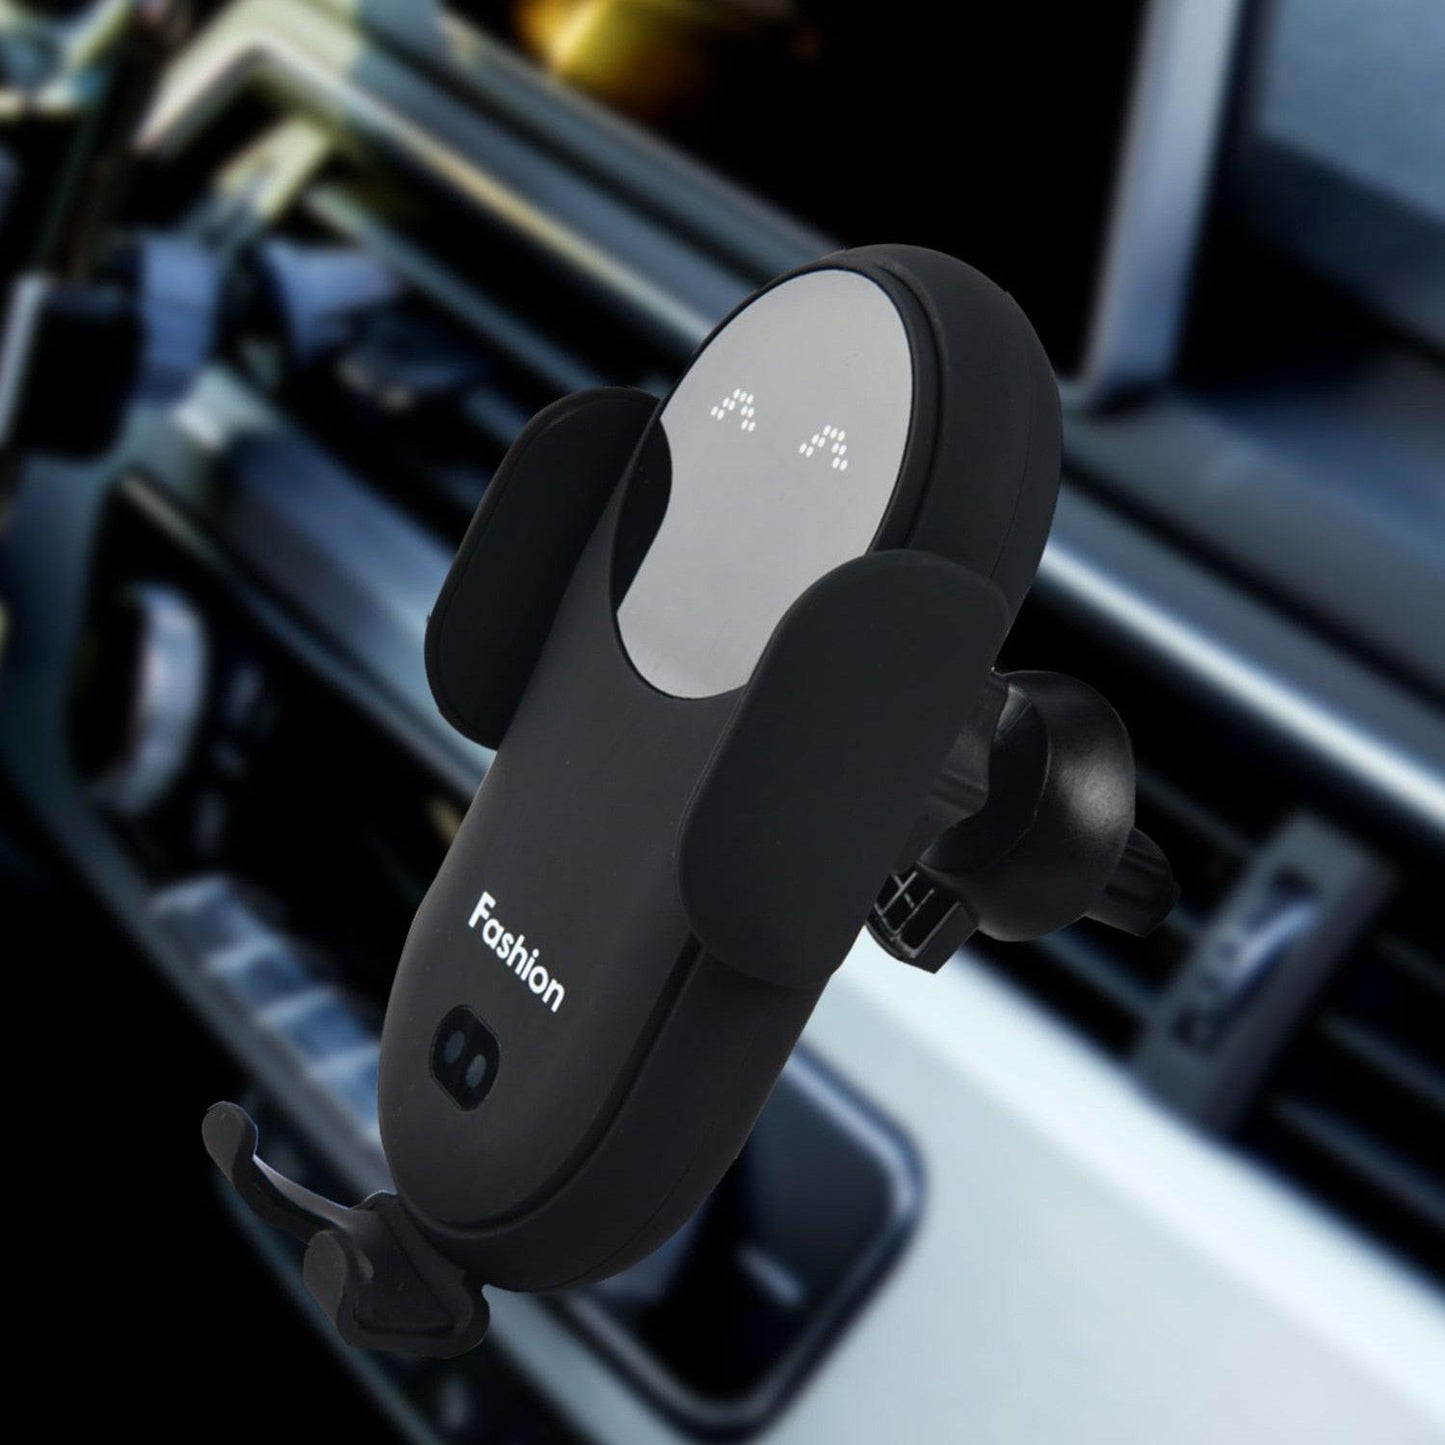 10W Car Wireless Charger Car Phone Holder for iPhone 12 12ProMax 11 11Pro X XR XSMAX 8 7 Plus Intelligent Infrared Phone Holder - Image #10